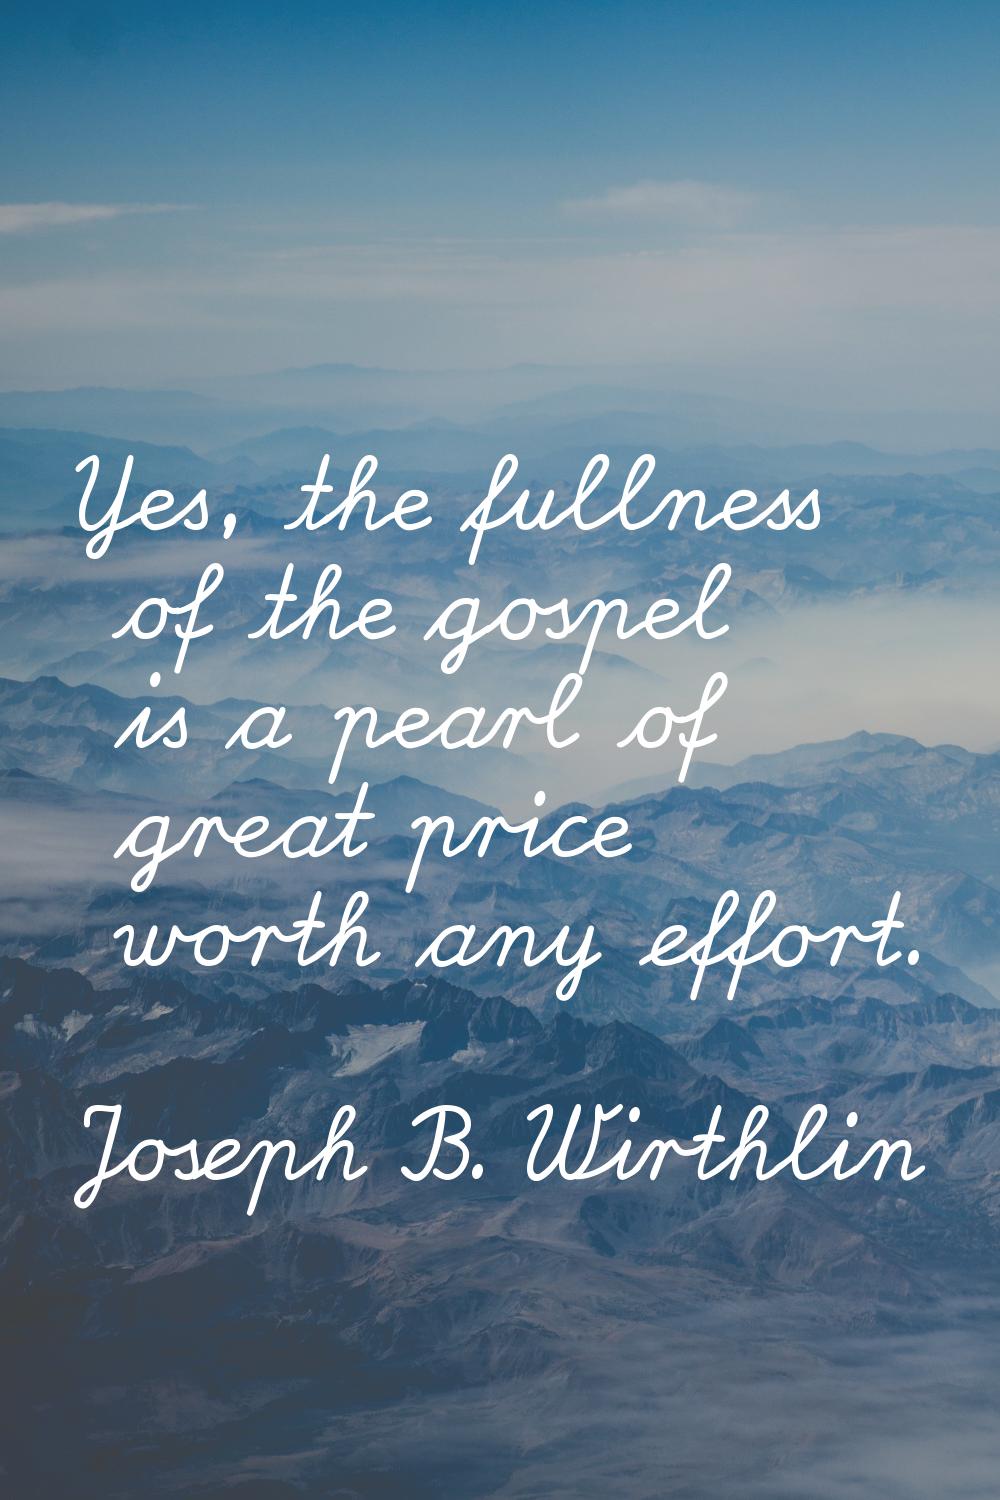 Yes, the fullness of the gospel is a pearl of great price worth any effort.